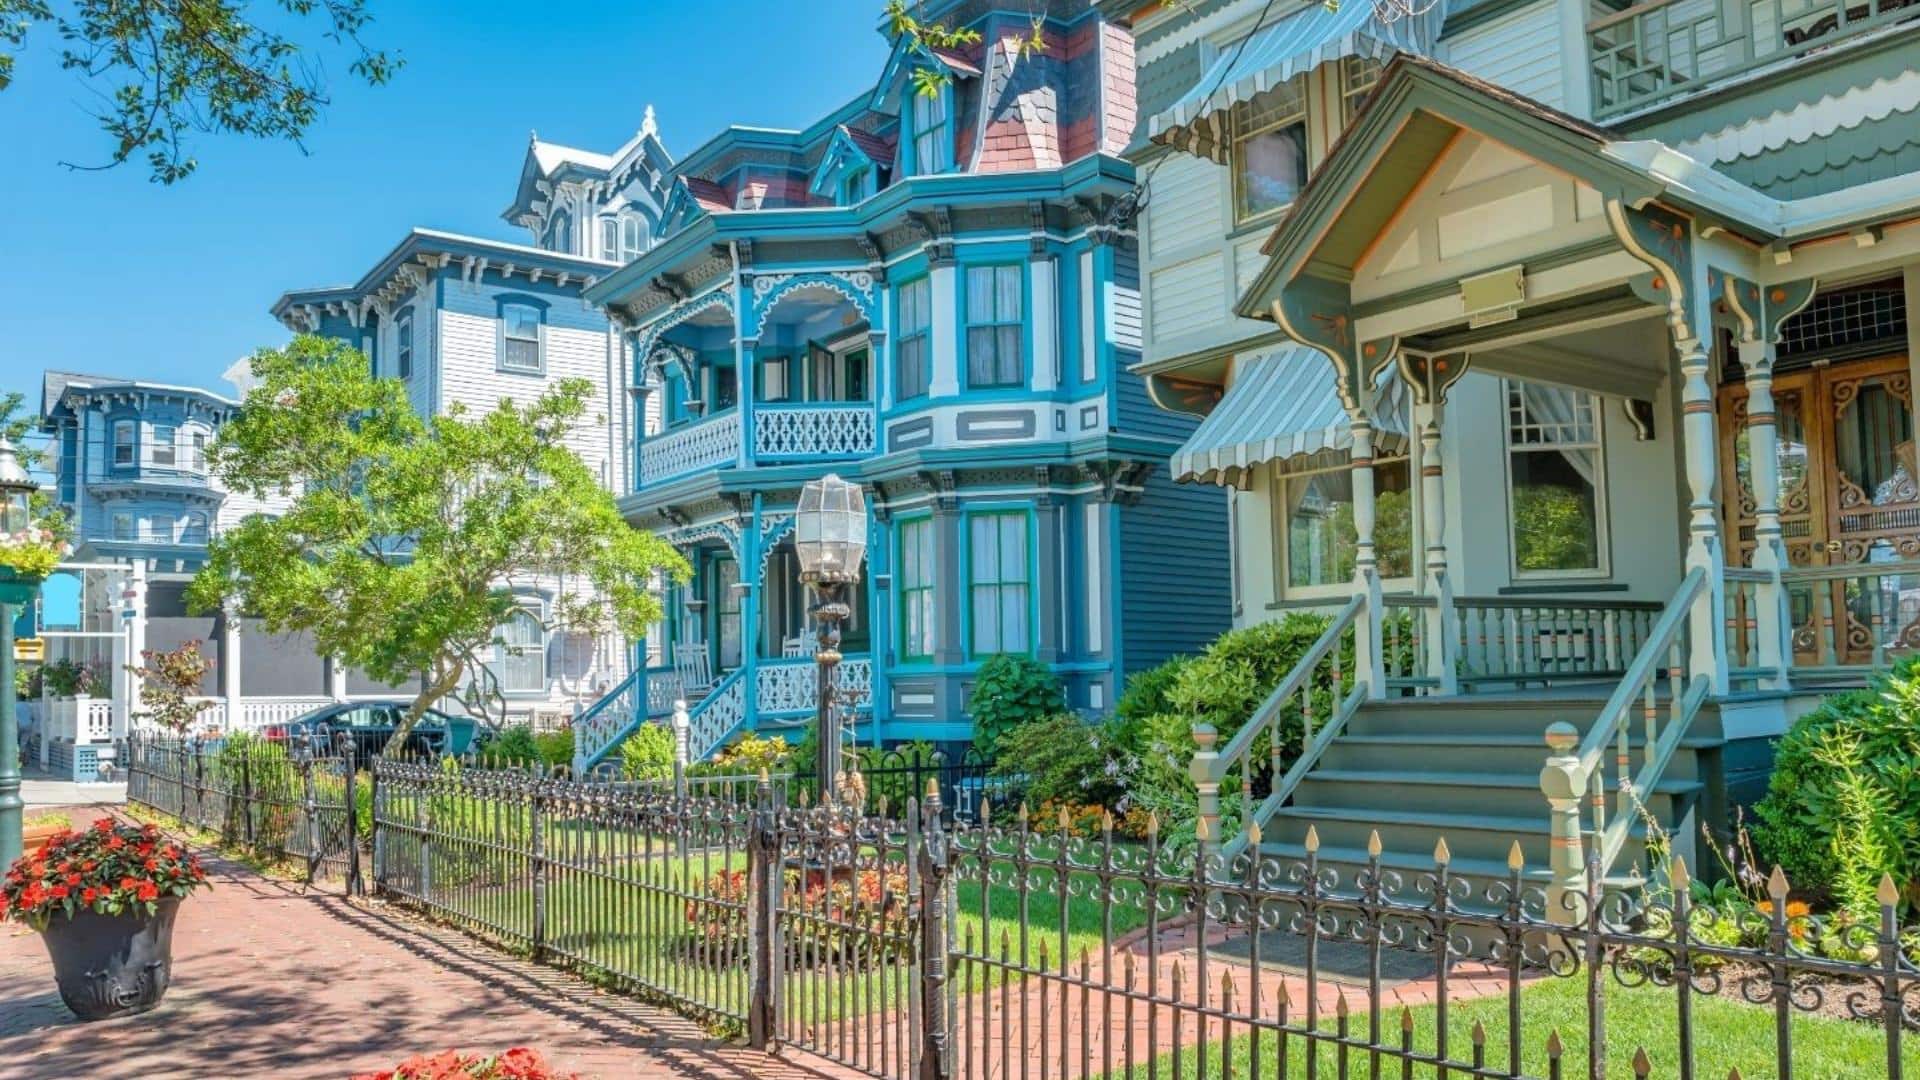 Painted Ladies or Victorian buildings of Cape May